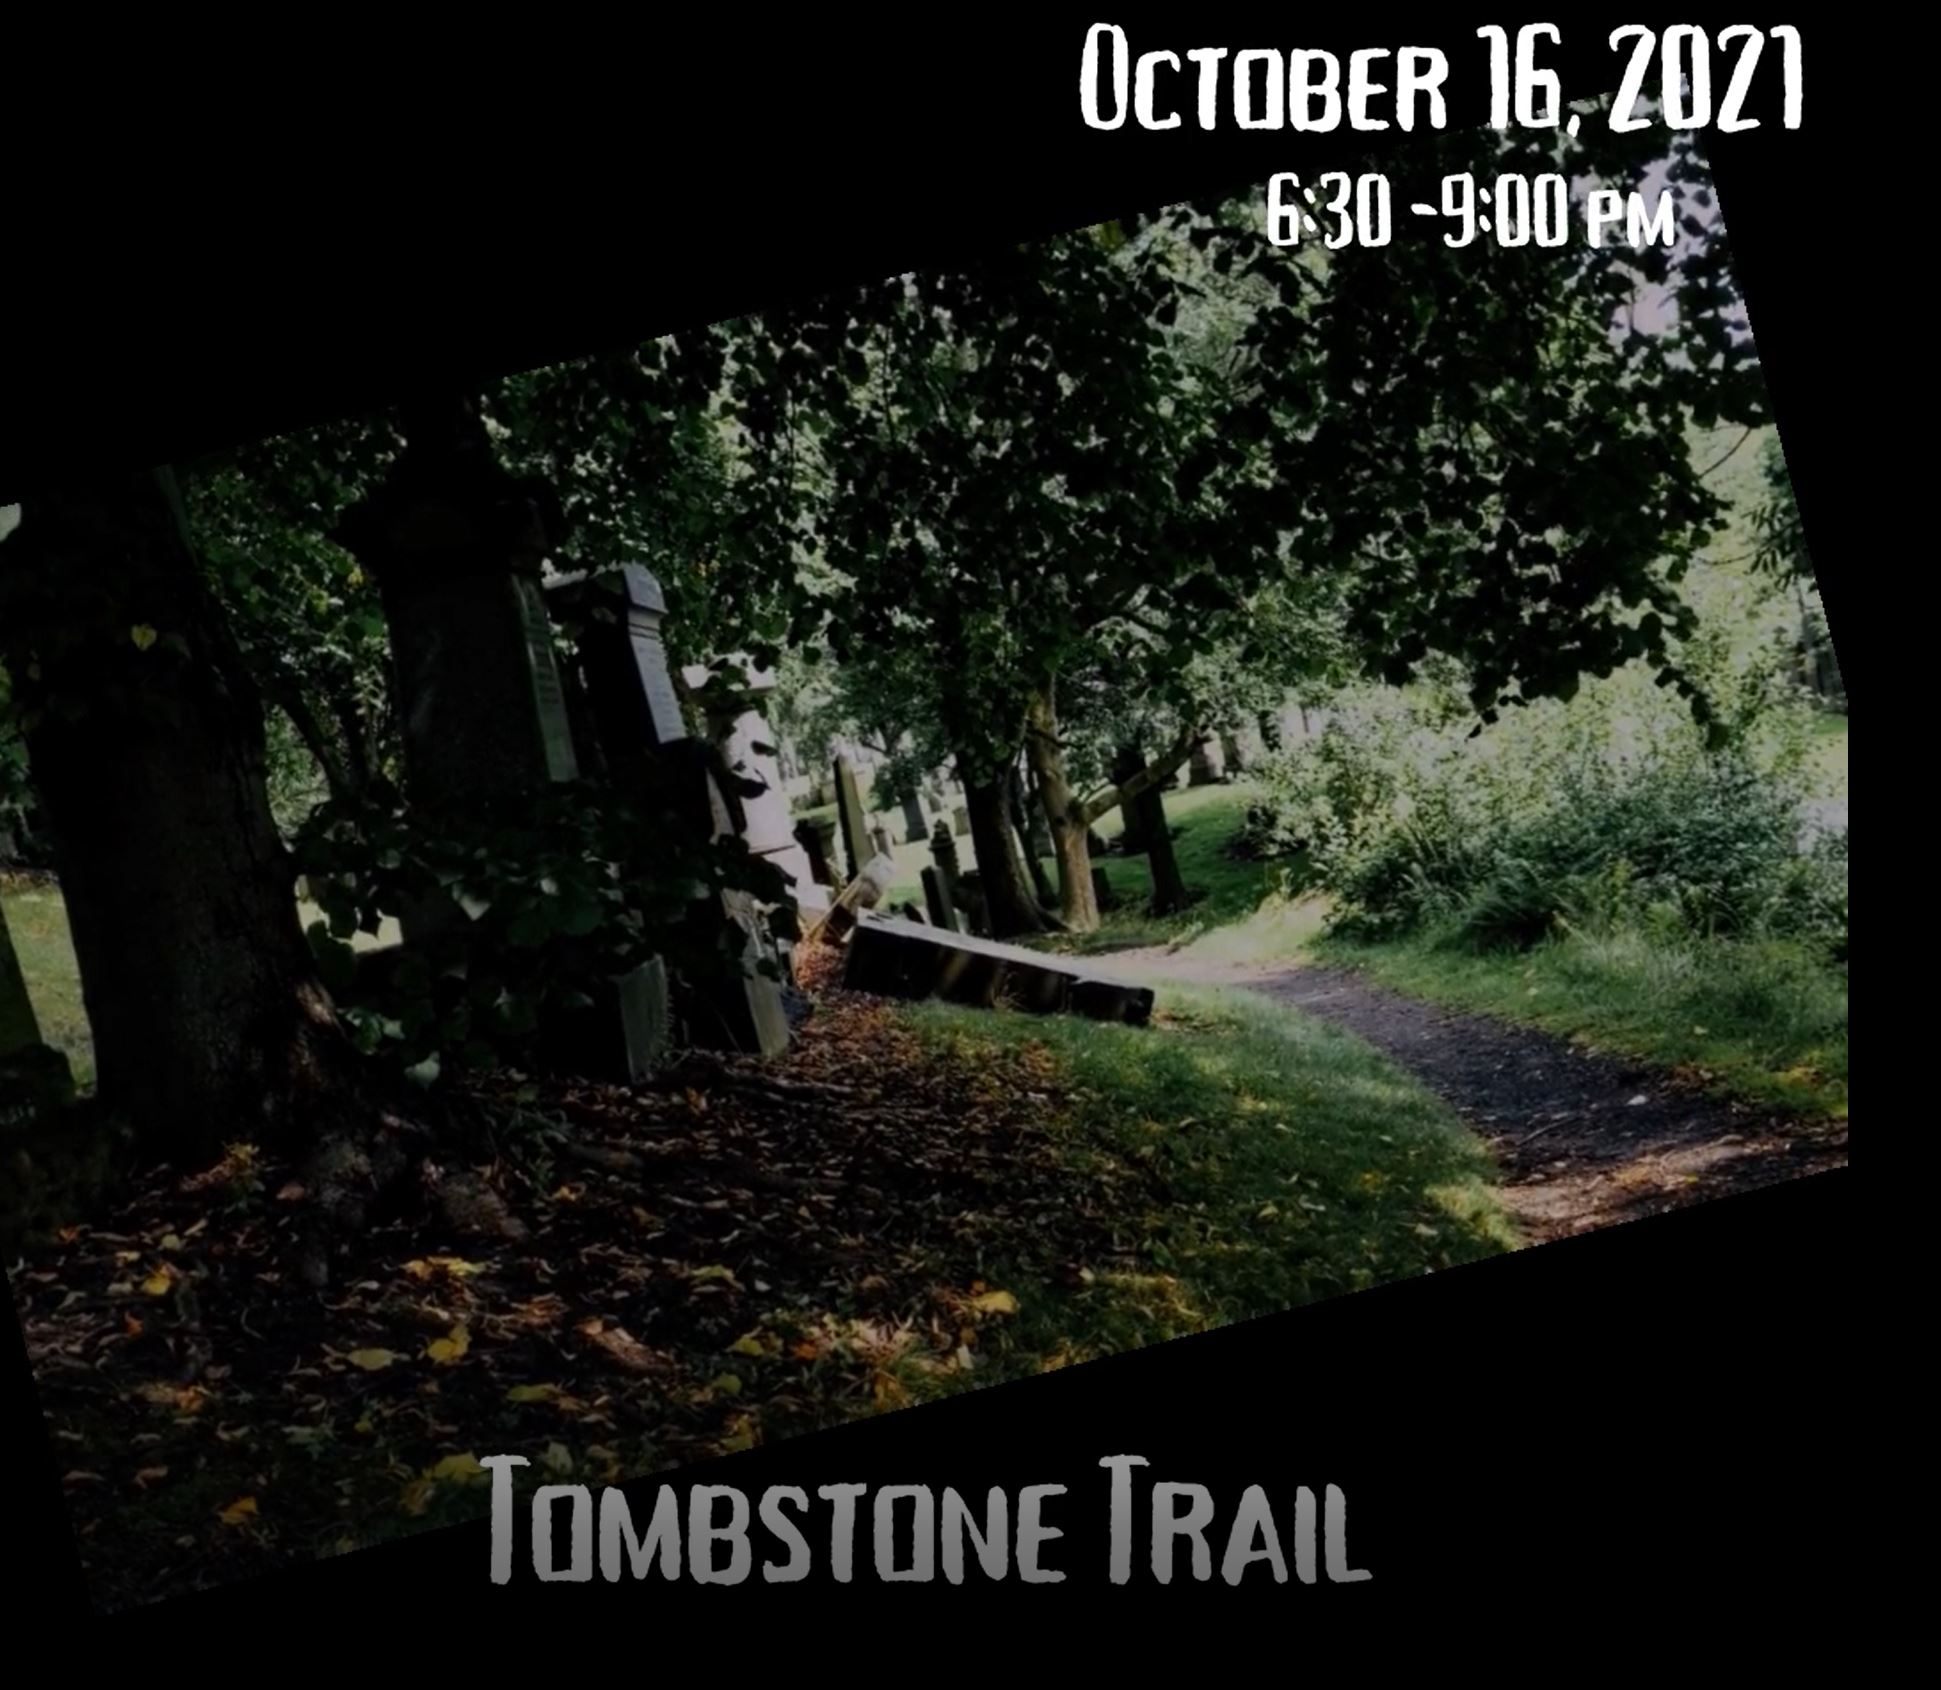 Tombstone Trail